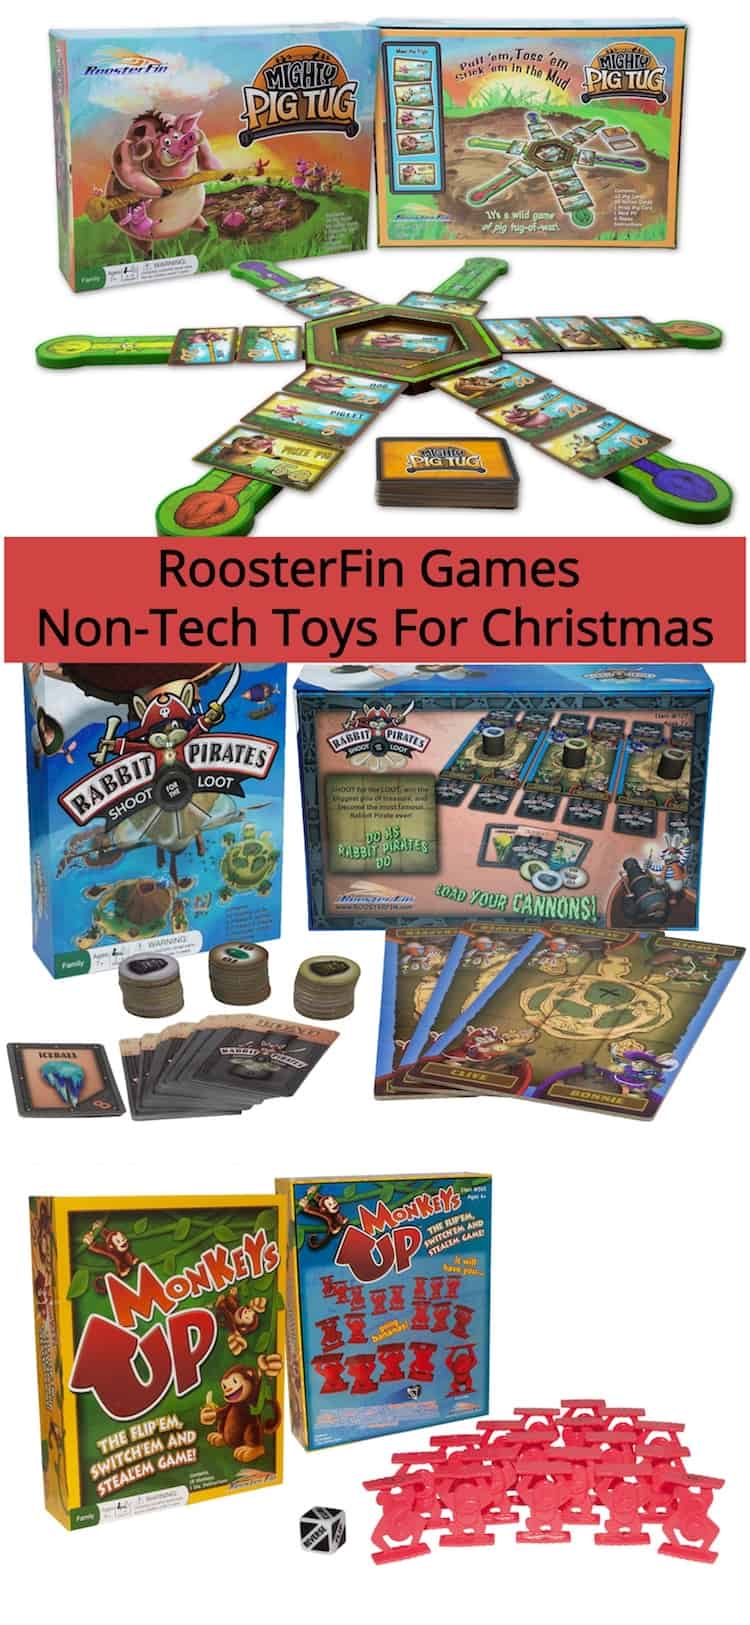 Check out these non-tech Christmas gifts for kids. RoosterFin Board games are fun for the whole family. Spend more time playing together! 